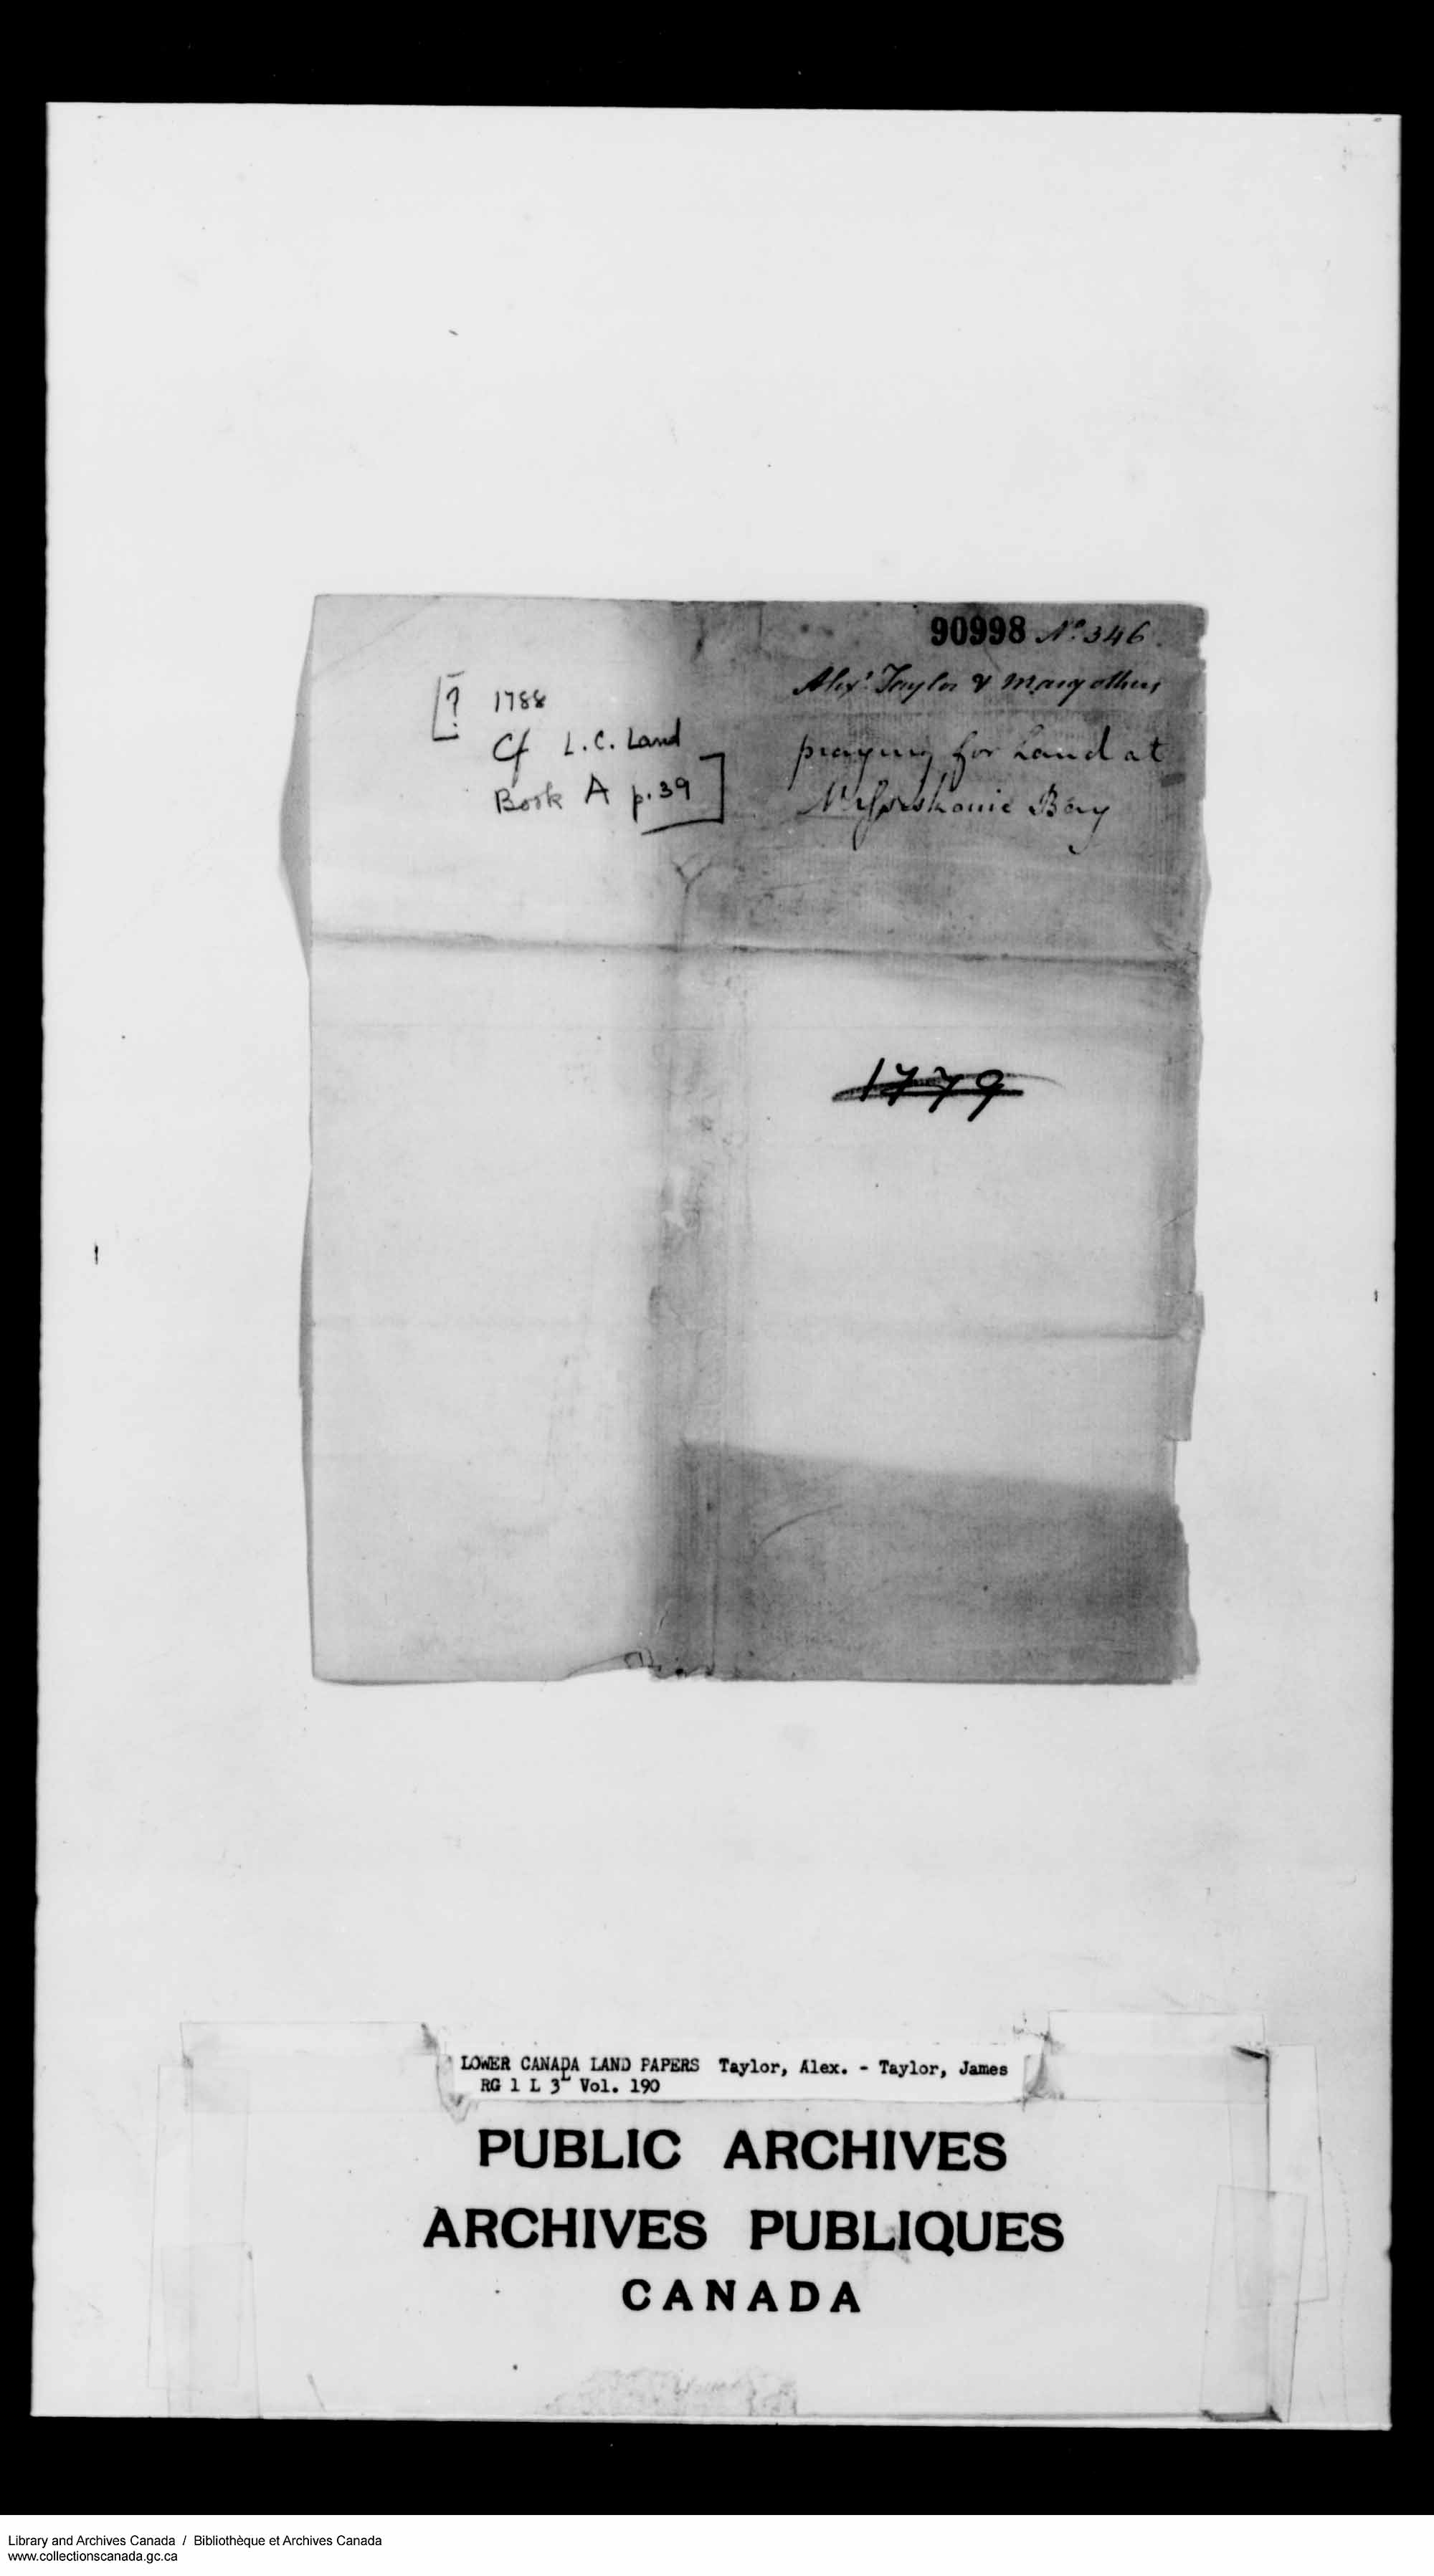 Digitized page of  for Image No.: e008738182